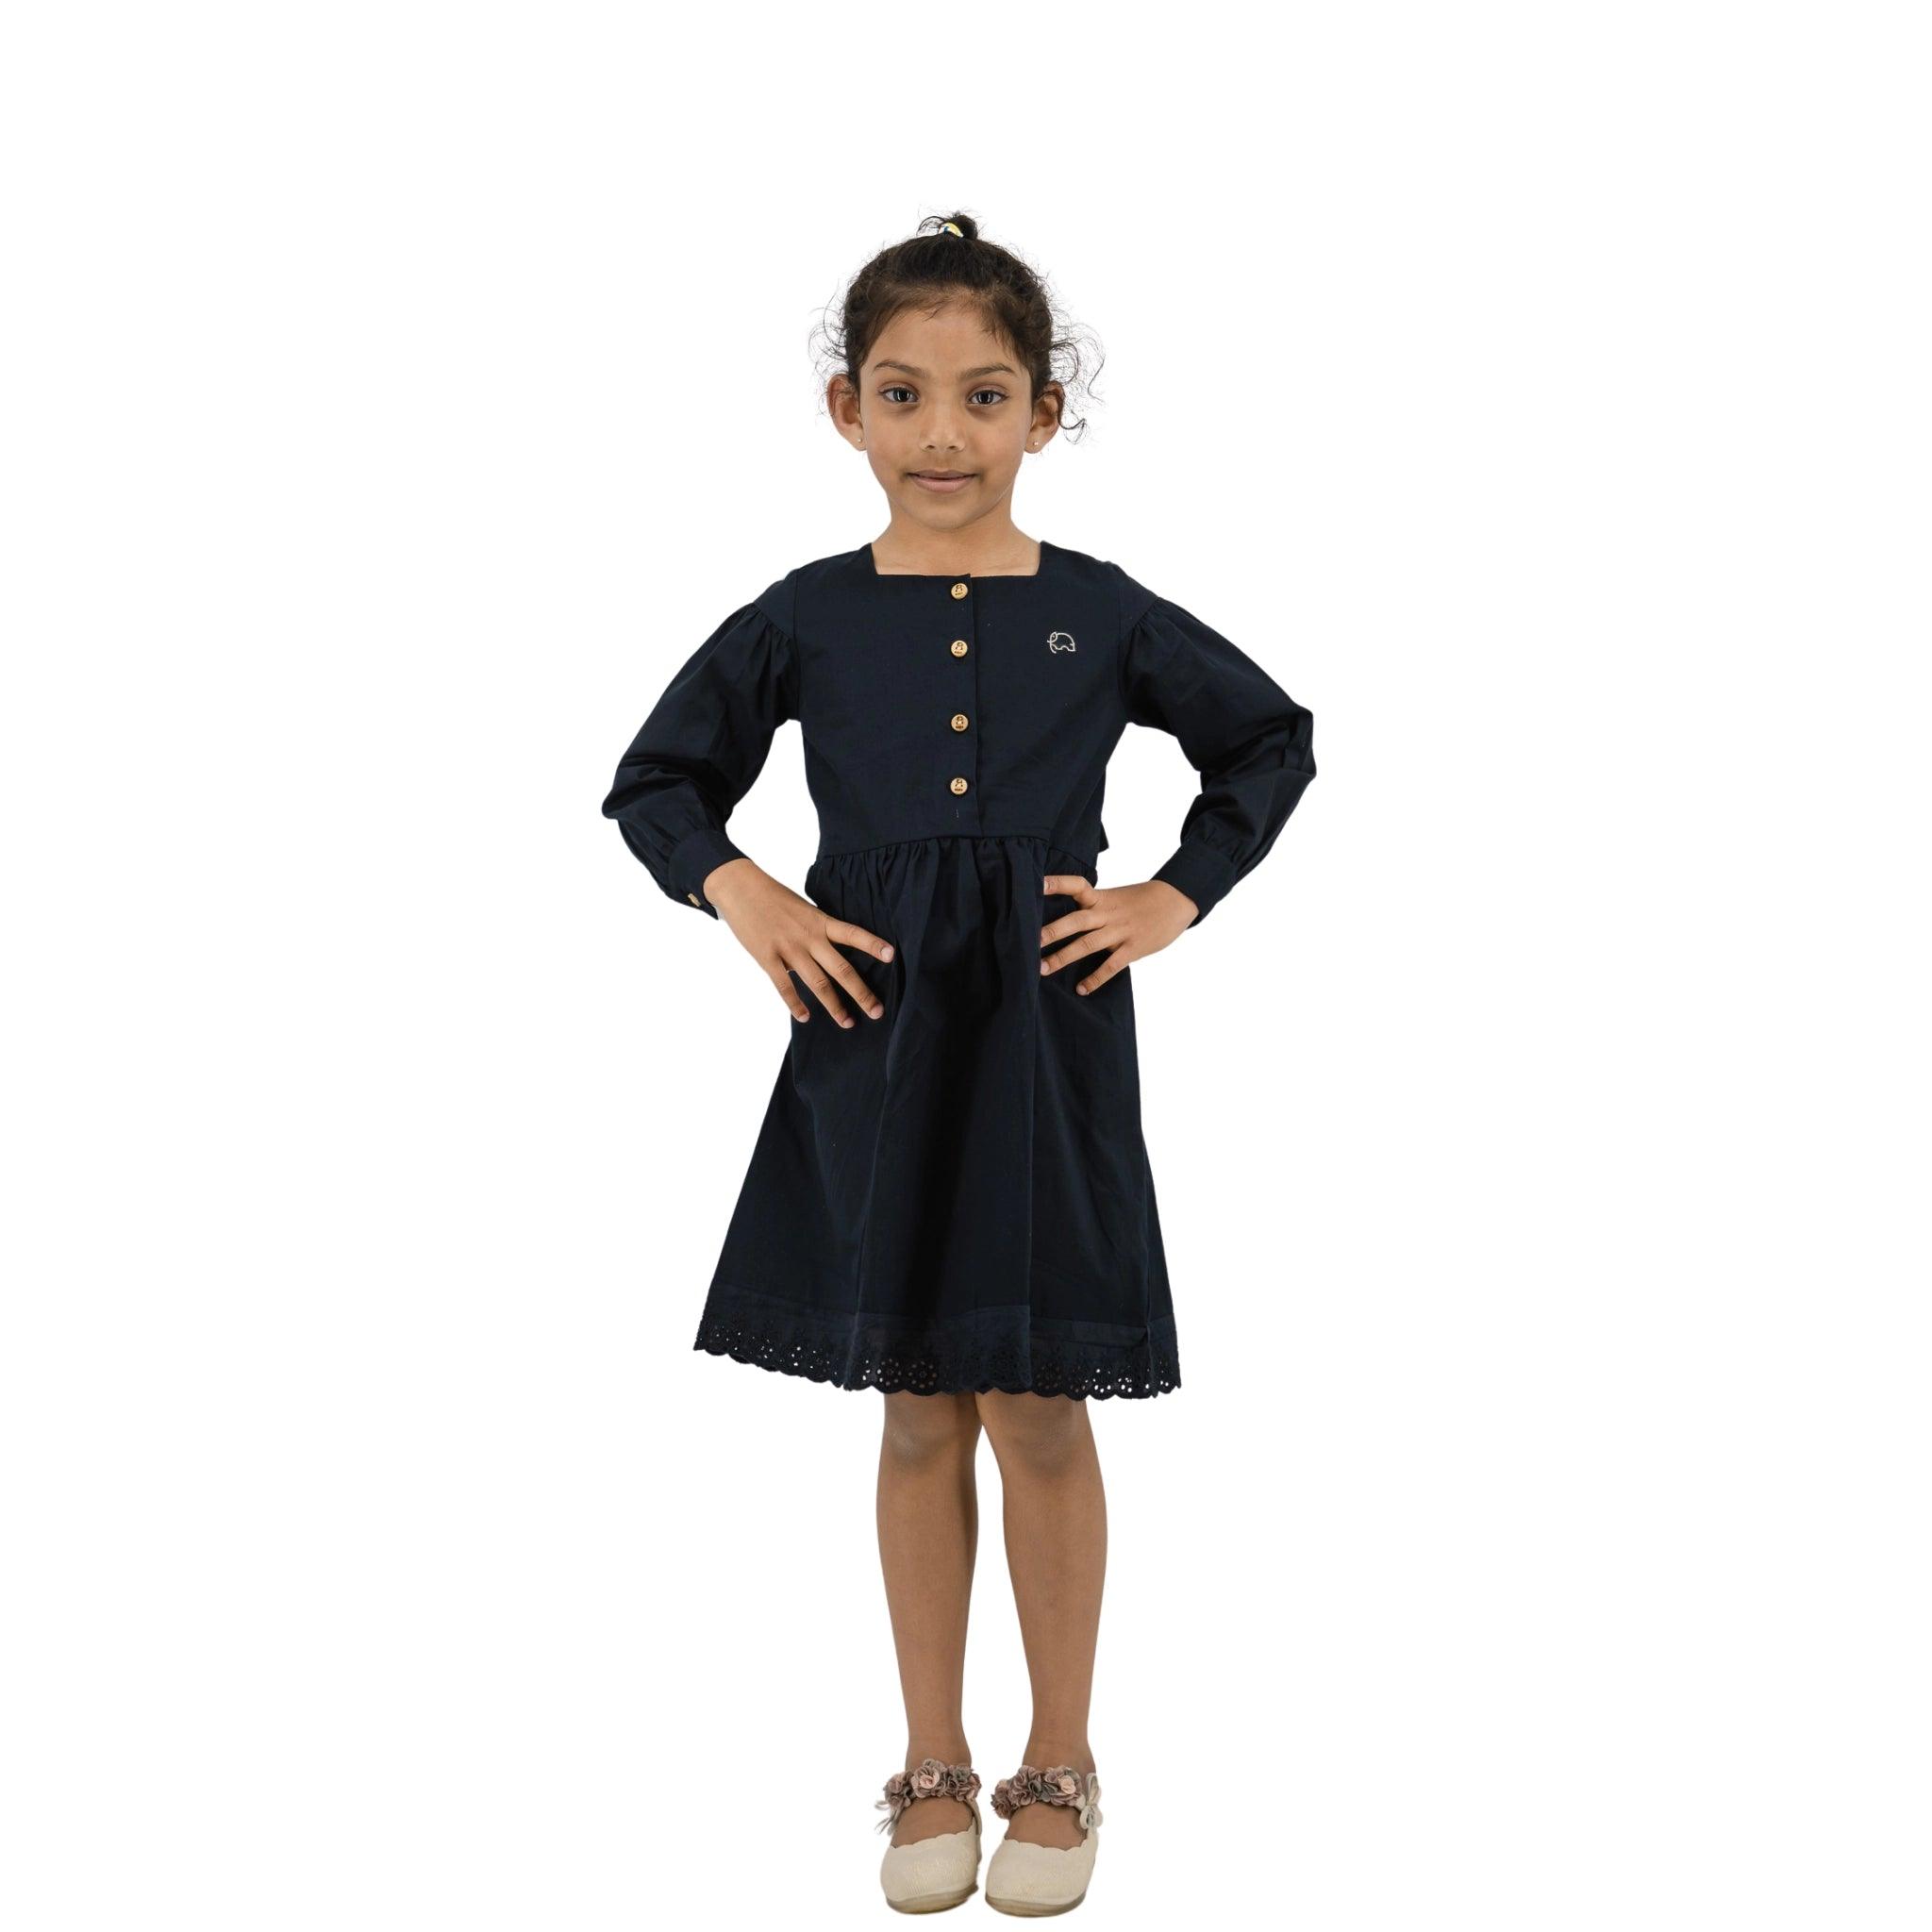 A girl in a Karee black long puff sleeve cotton dress with white shoes, standing with hands on her hips, smiling, against a white background.